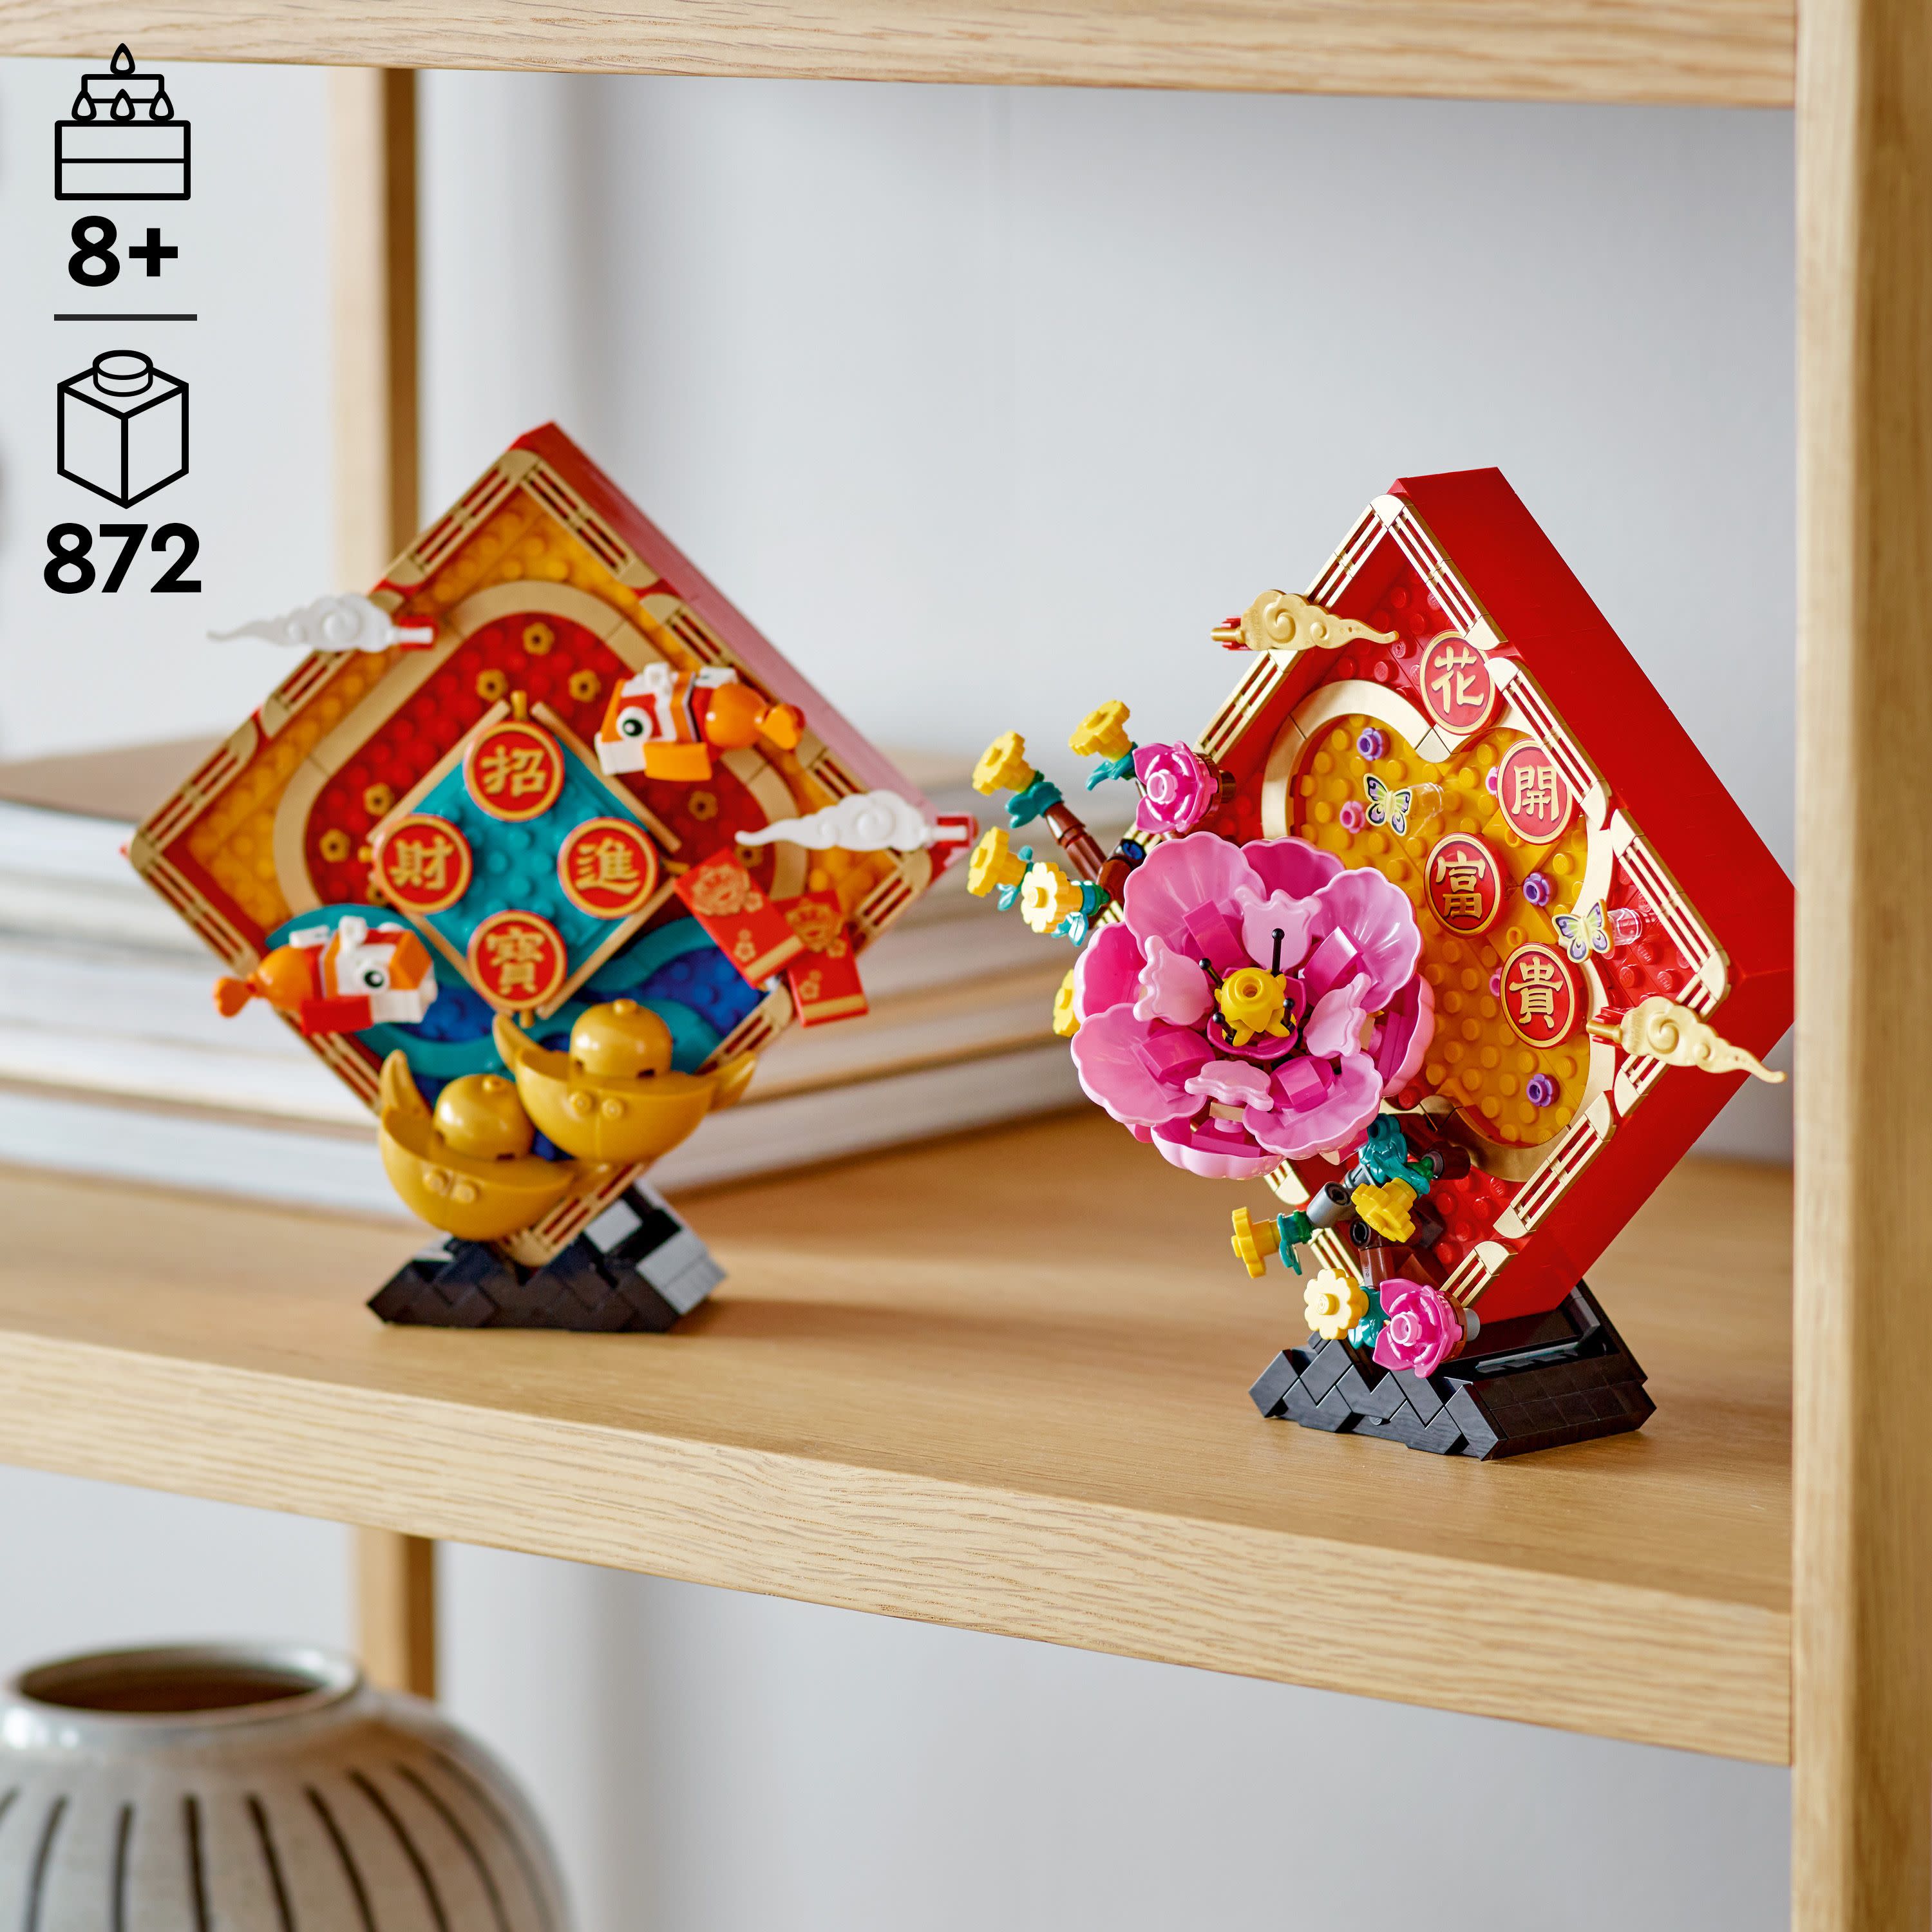 LEGO Lunar New Year Display 80110 Building Toy Set (872 Pieces) - image 4 of 8